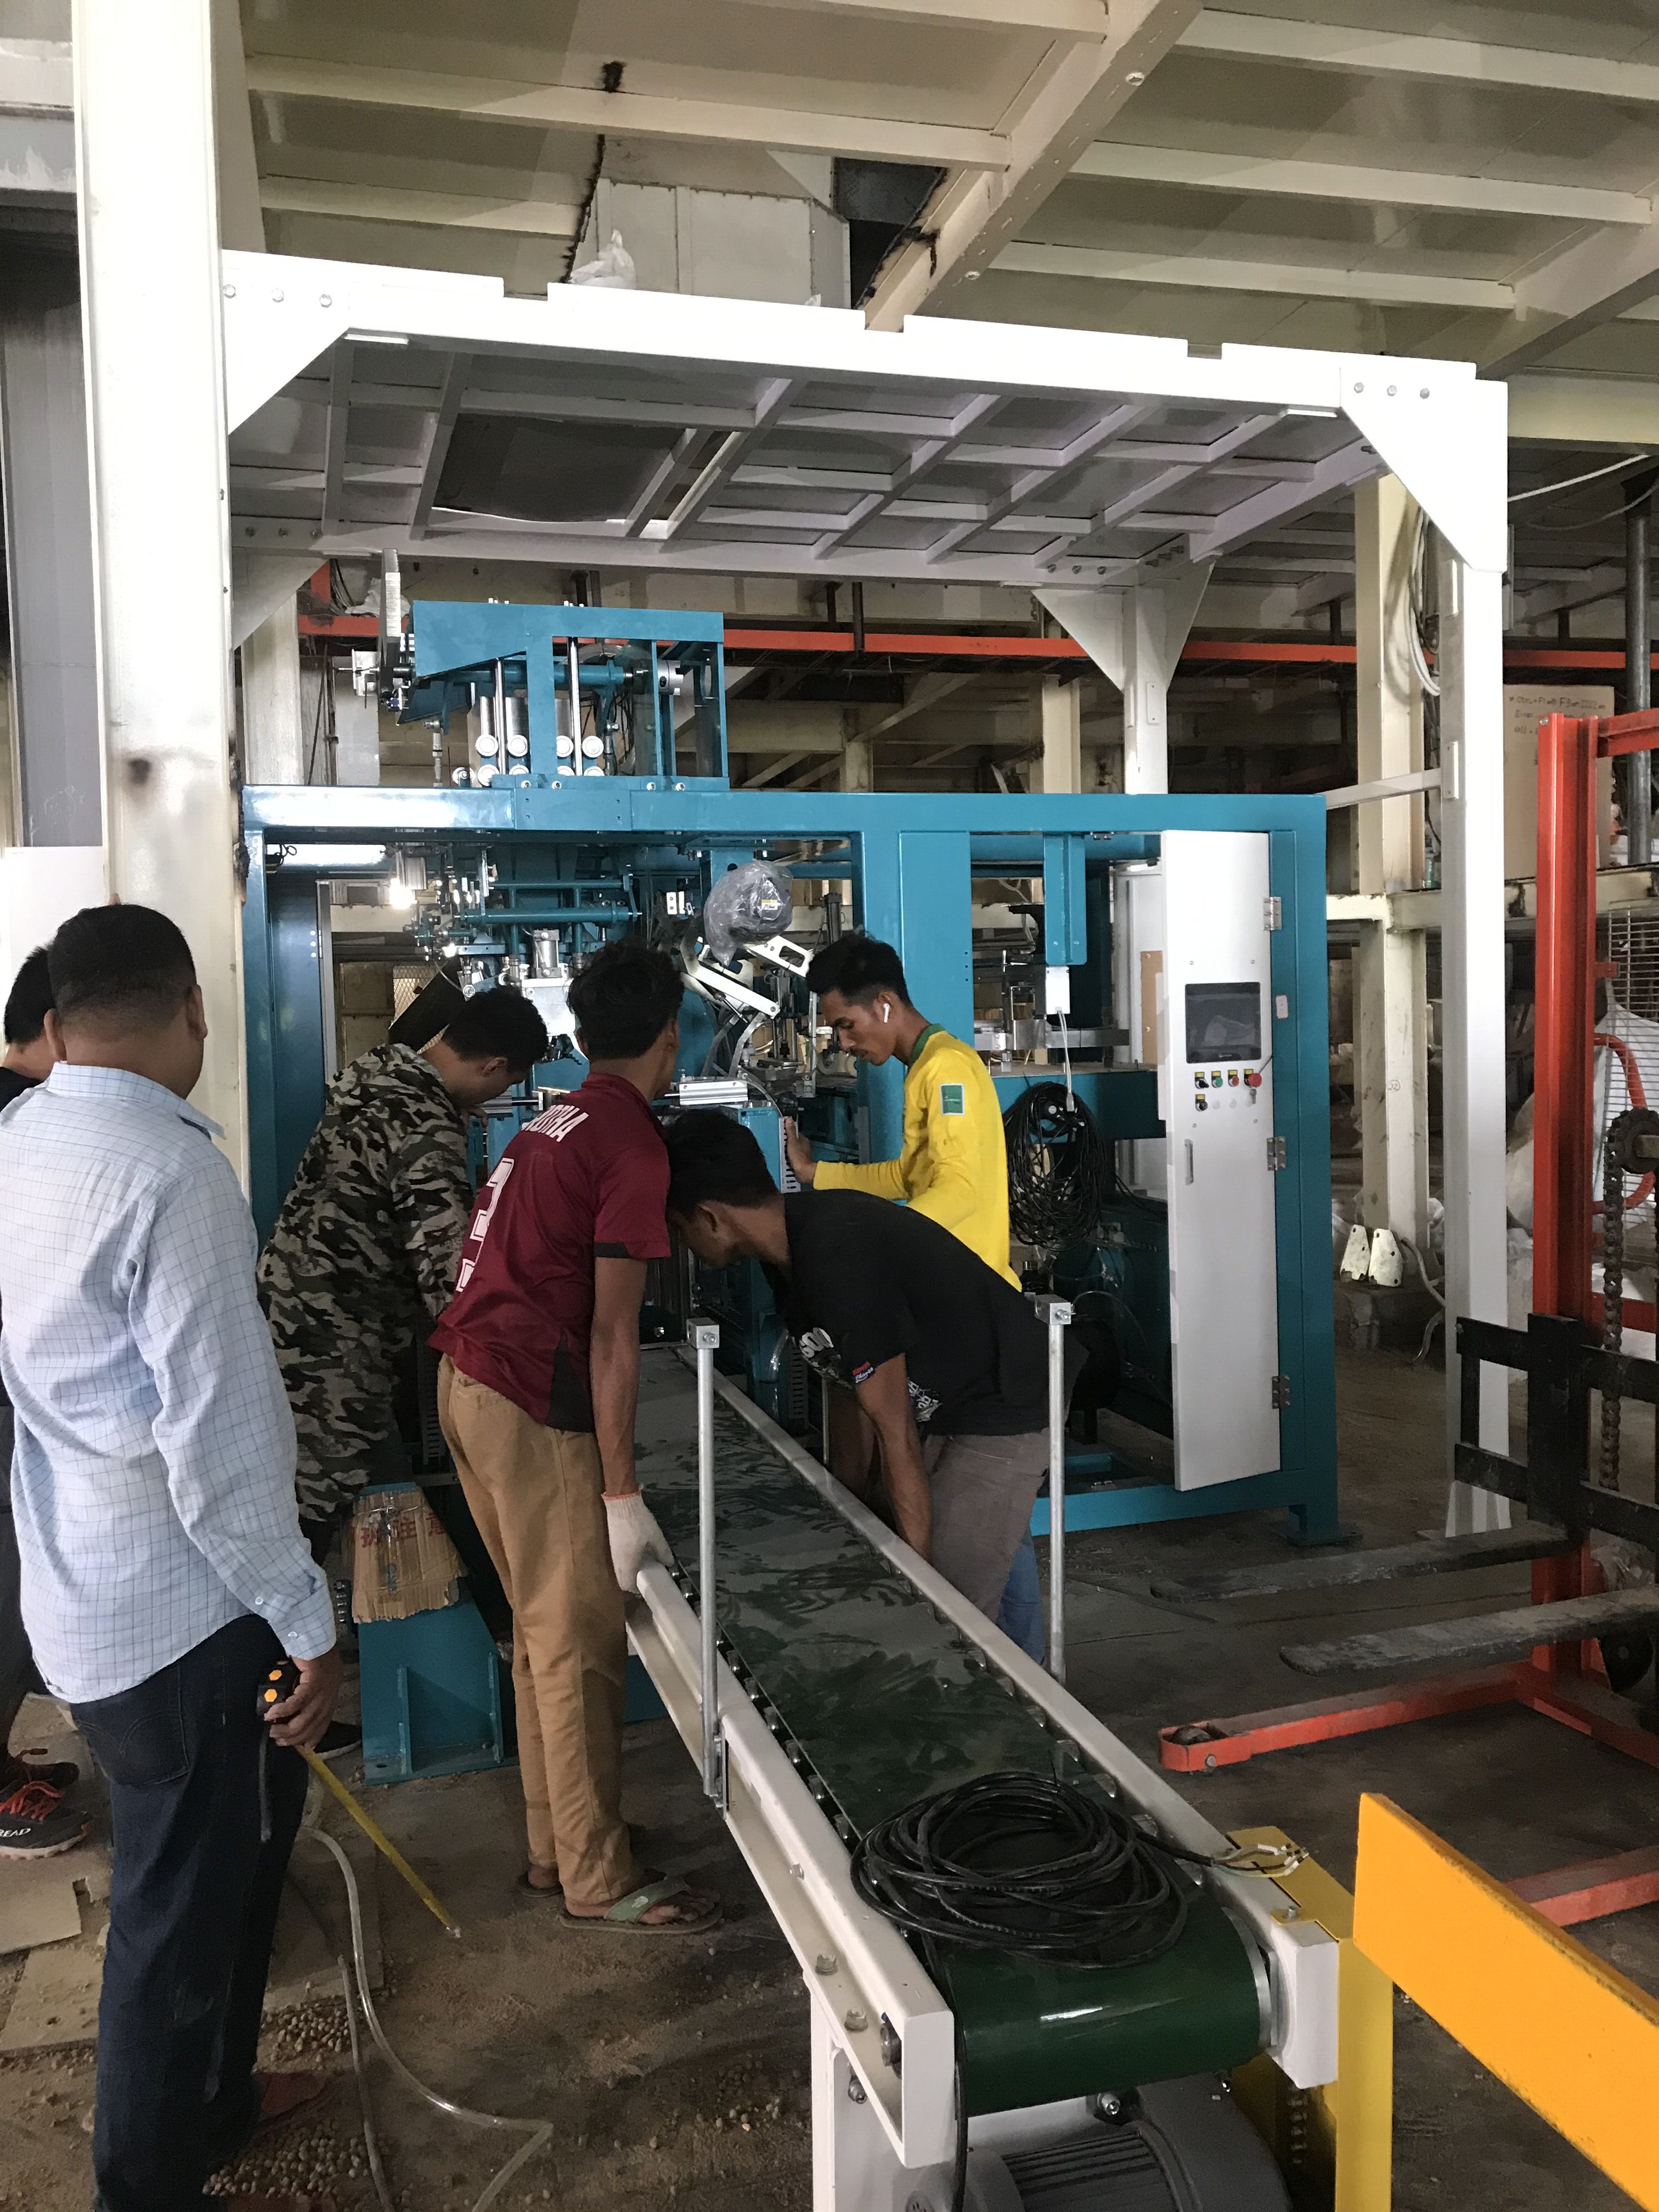 automatic packing machine Glass Spheres bagging machine fully Automatic Packing Palletizing Line, Fully Automatic Packing Line, Fully Automatic Bagging Line, Fully Automatic filling and packaging line